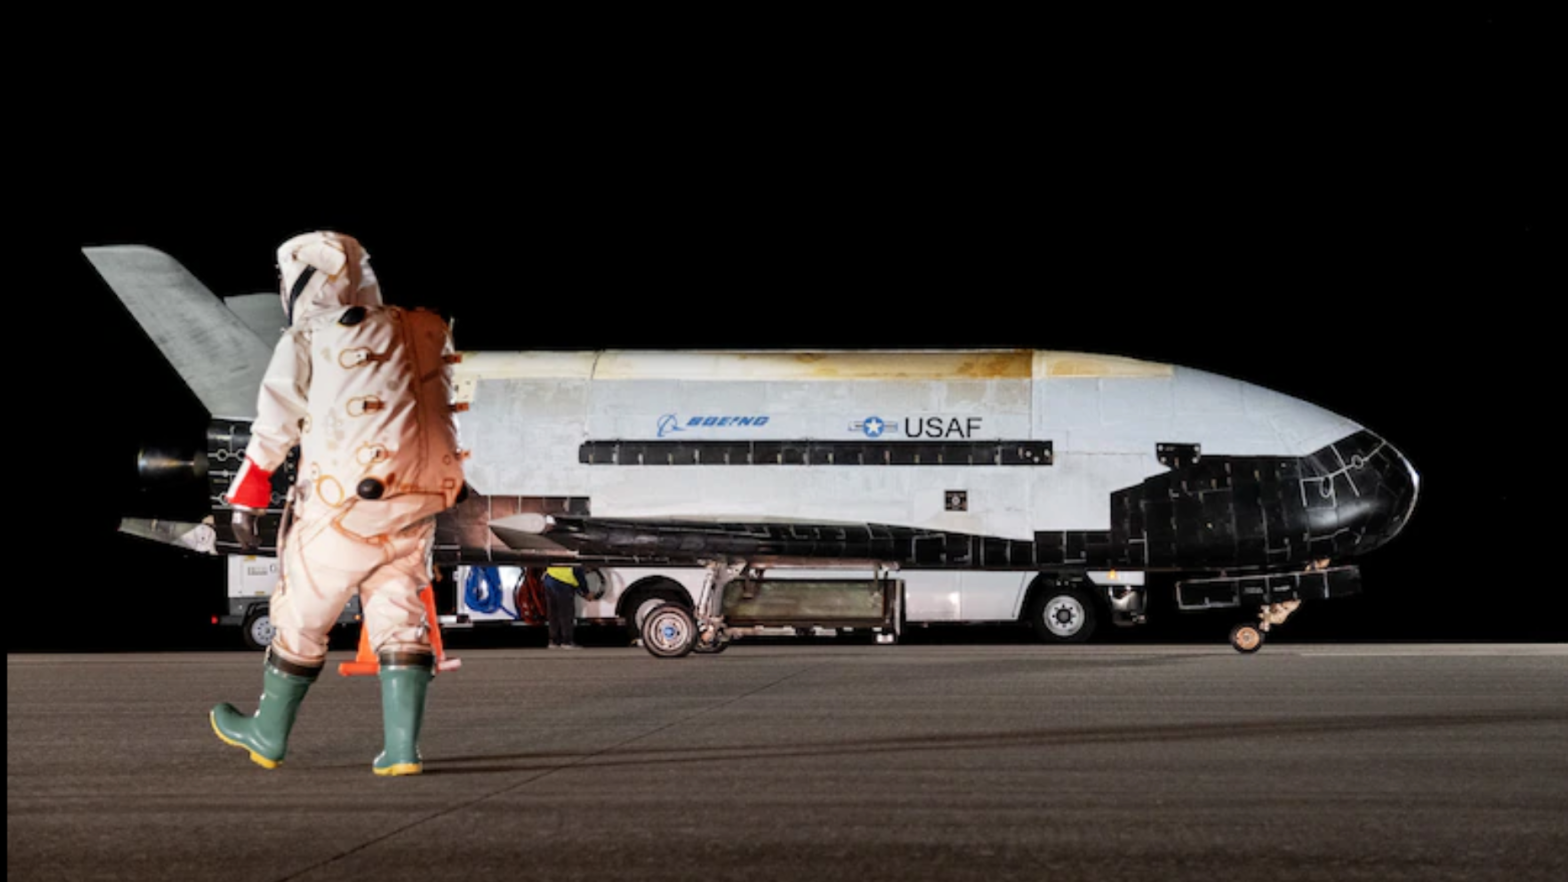 The uncrewed spaceplane landed at NASA's Kennedy Space Centre Shuttle Landing Facility. (Photo: U.S. Space Force)